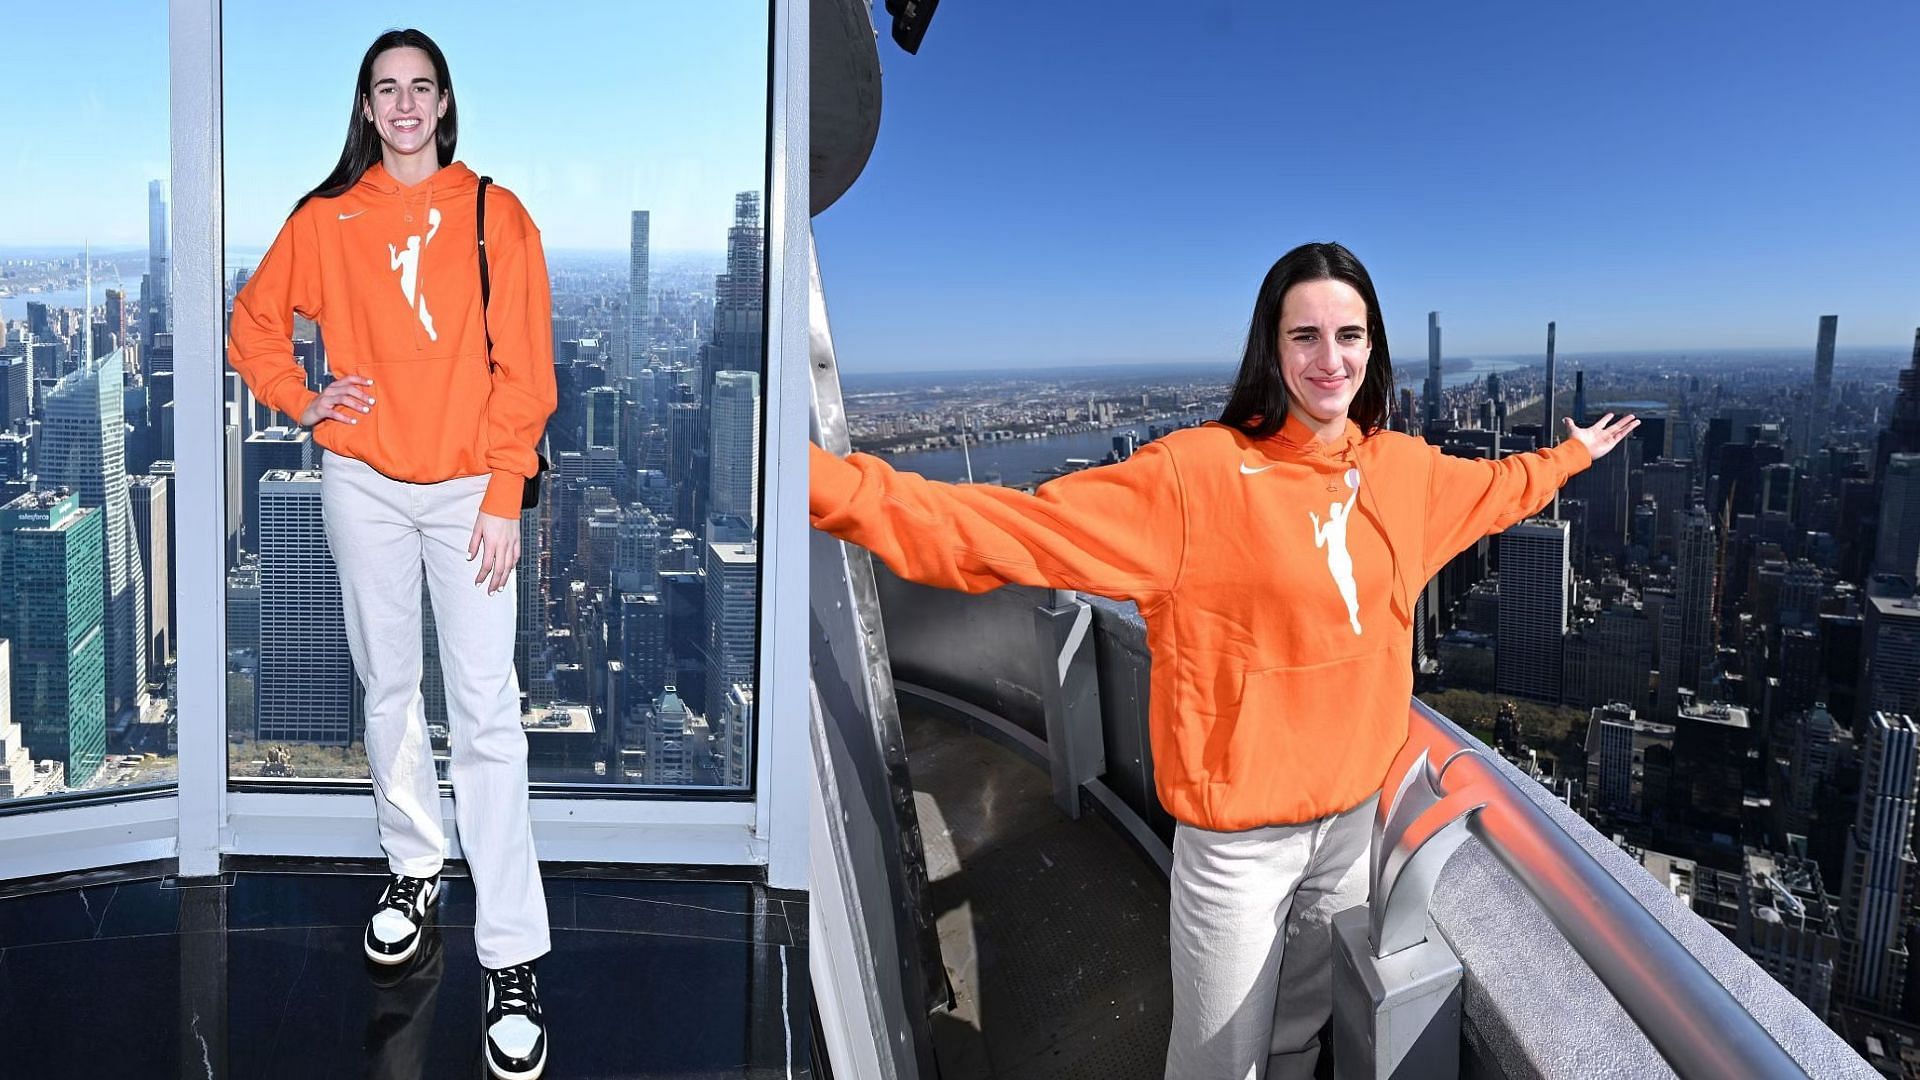 Caitlin Clark enjoying thev view from the Empire State Building ahead of the WNBA draft